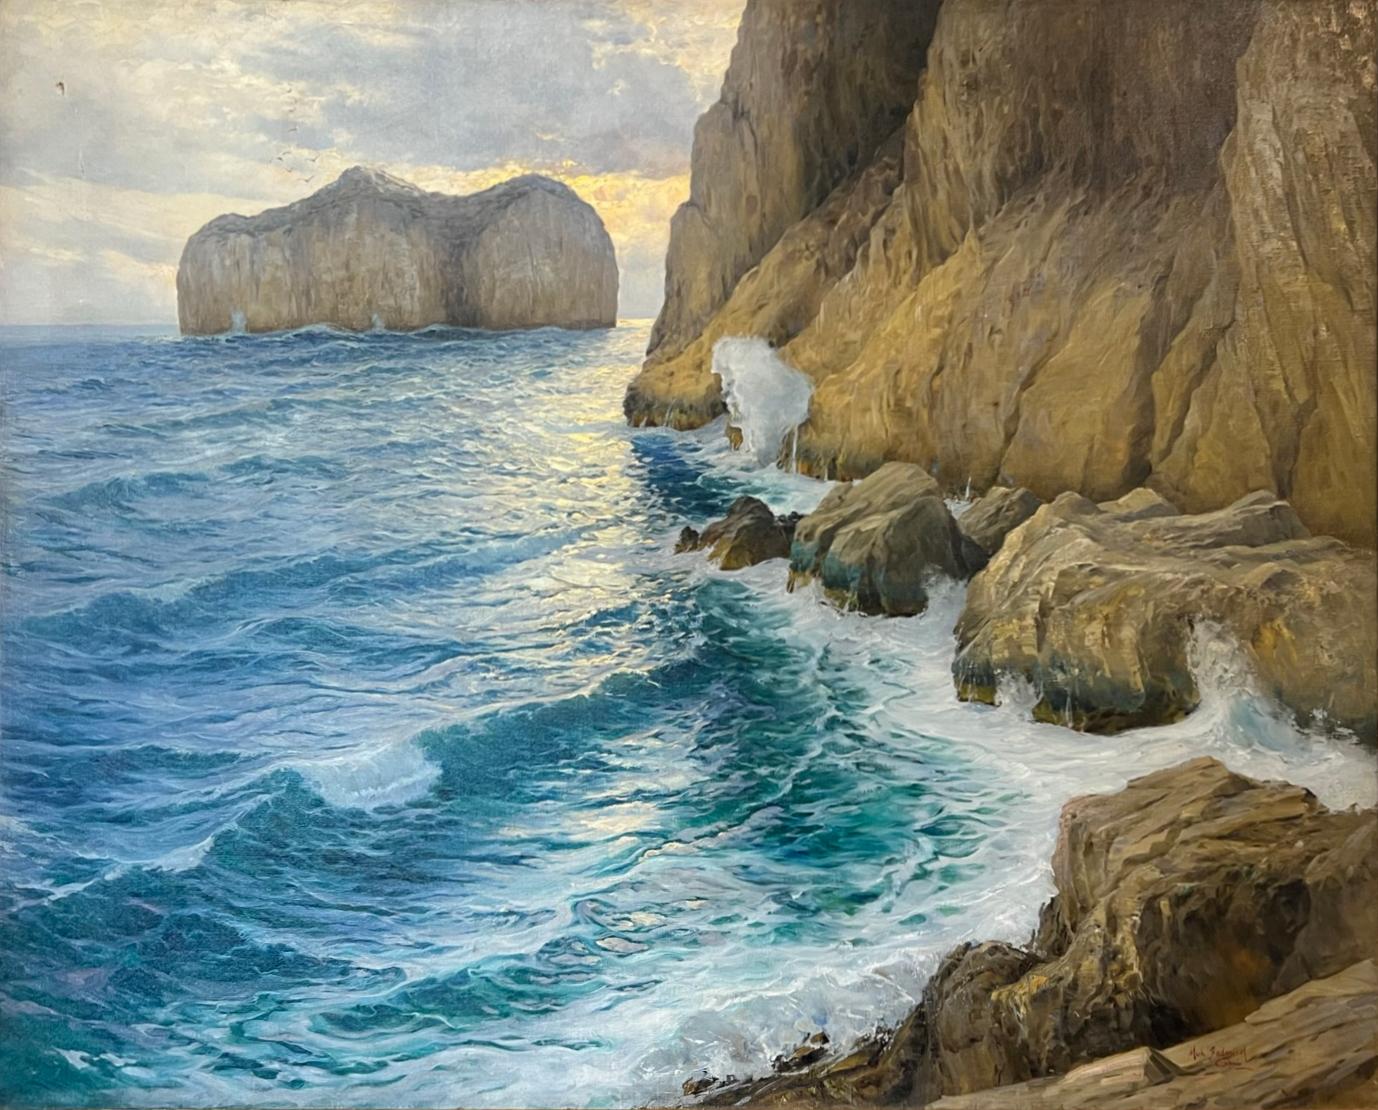 MONUMENTAL Impressionist Seascape of CAPRI, IT - Painting by Cavalier Michele Federico